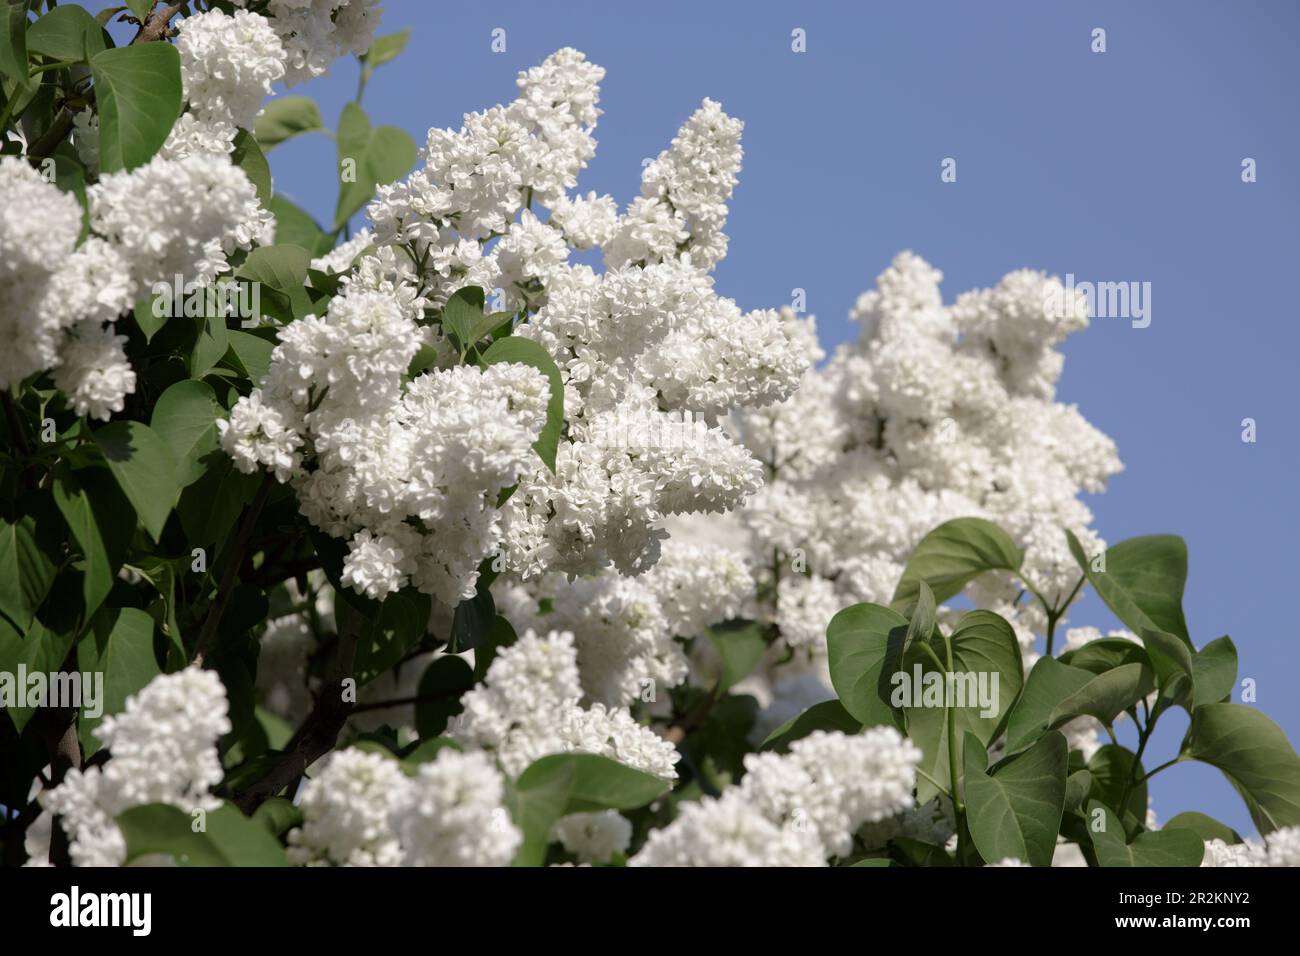 Bush of white lilac. Beautiful white flowers on a blue sky background. Branch of lilac branches. White lilac blooms with beautiful flowers Stock Photo